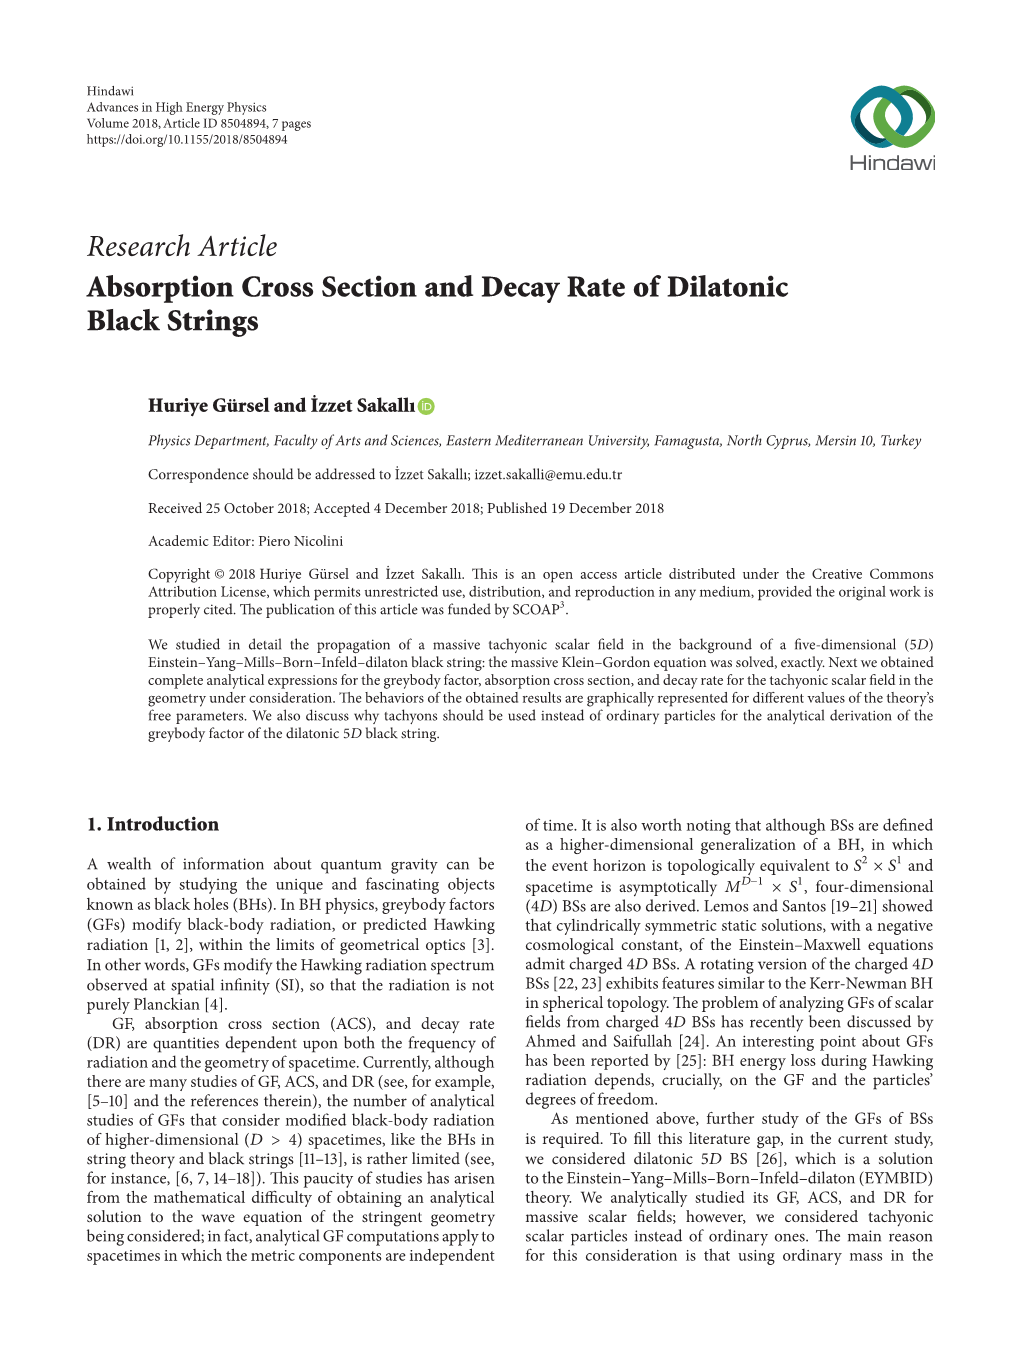 Research Article Absorption Cross Section and Decay Rate of Dilatonic Black Strings